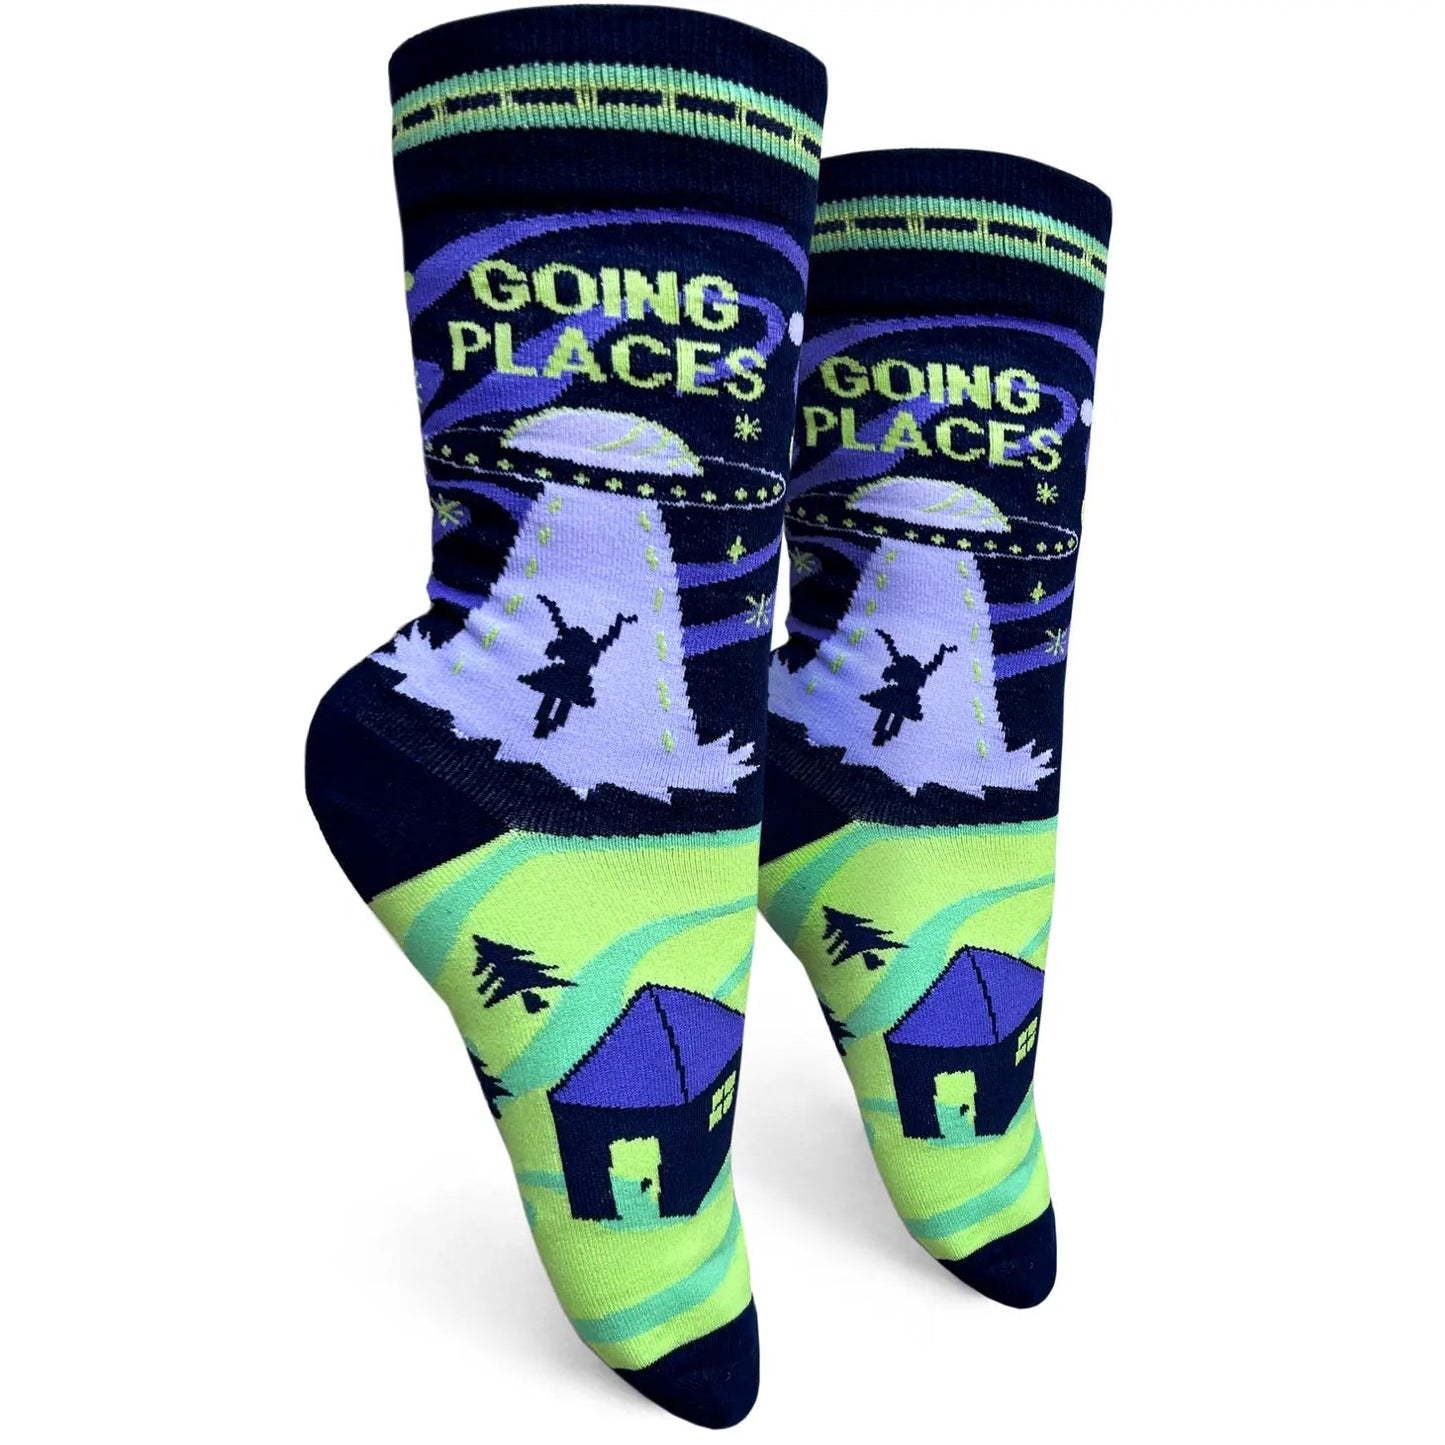 Going Places Women's Socks in Black and Green